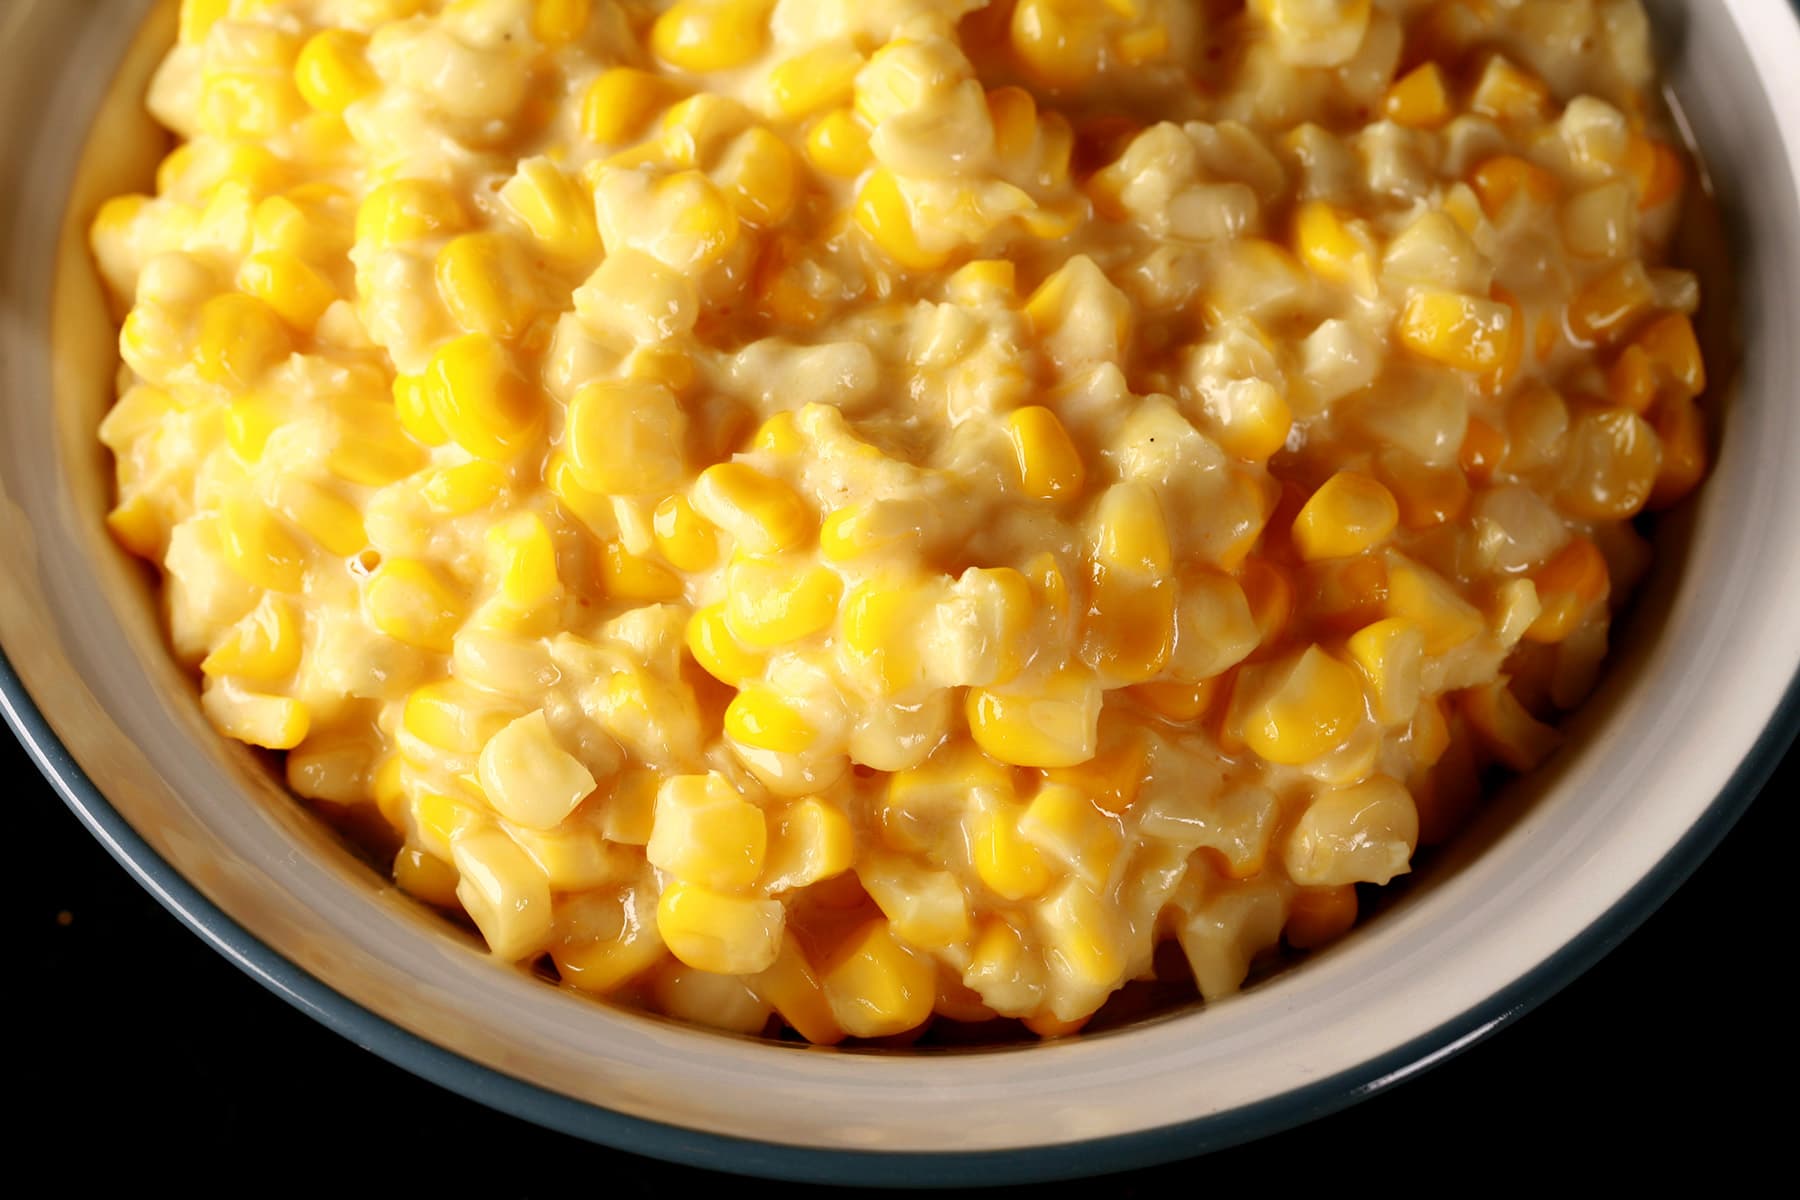 A large white bowl full of homemade creamed corn, against a black background.